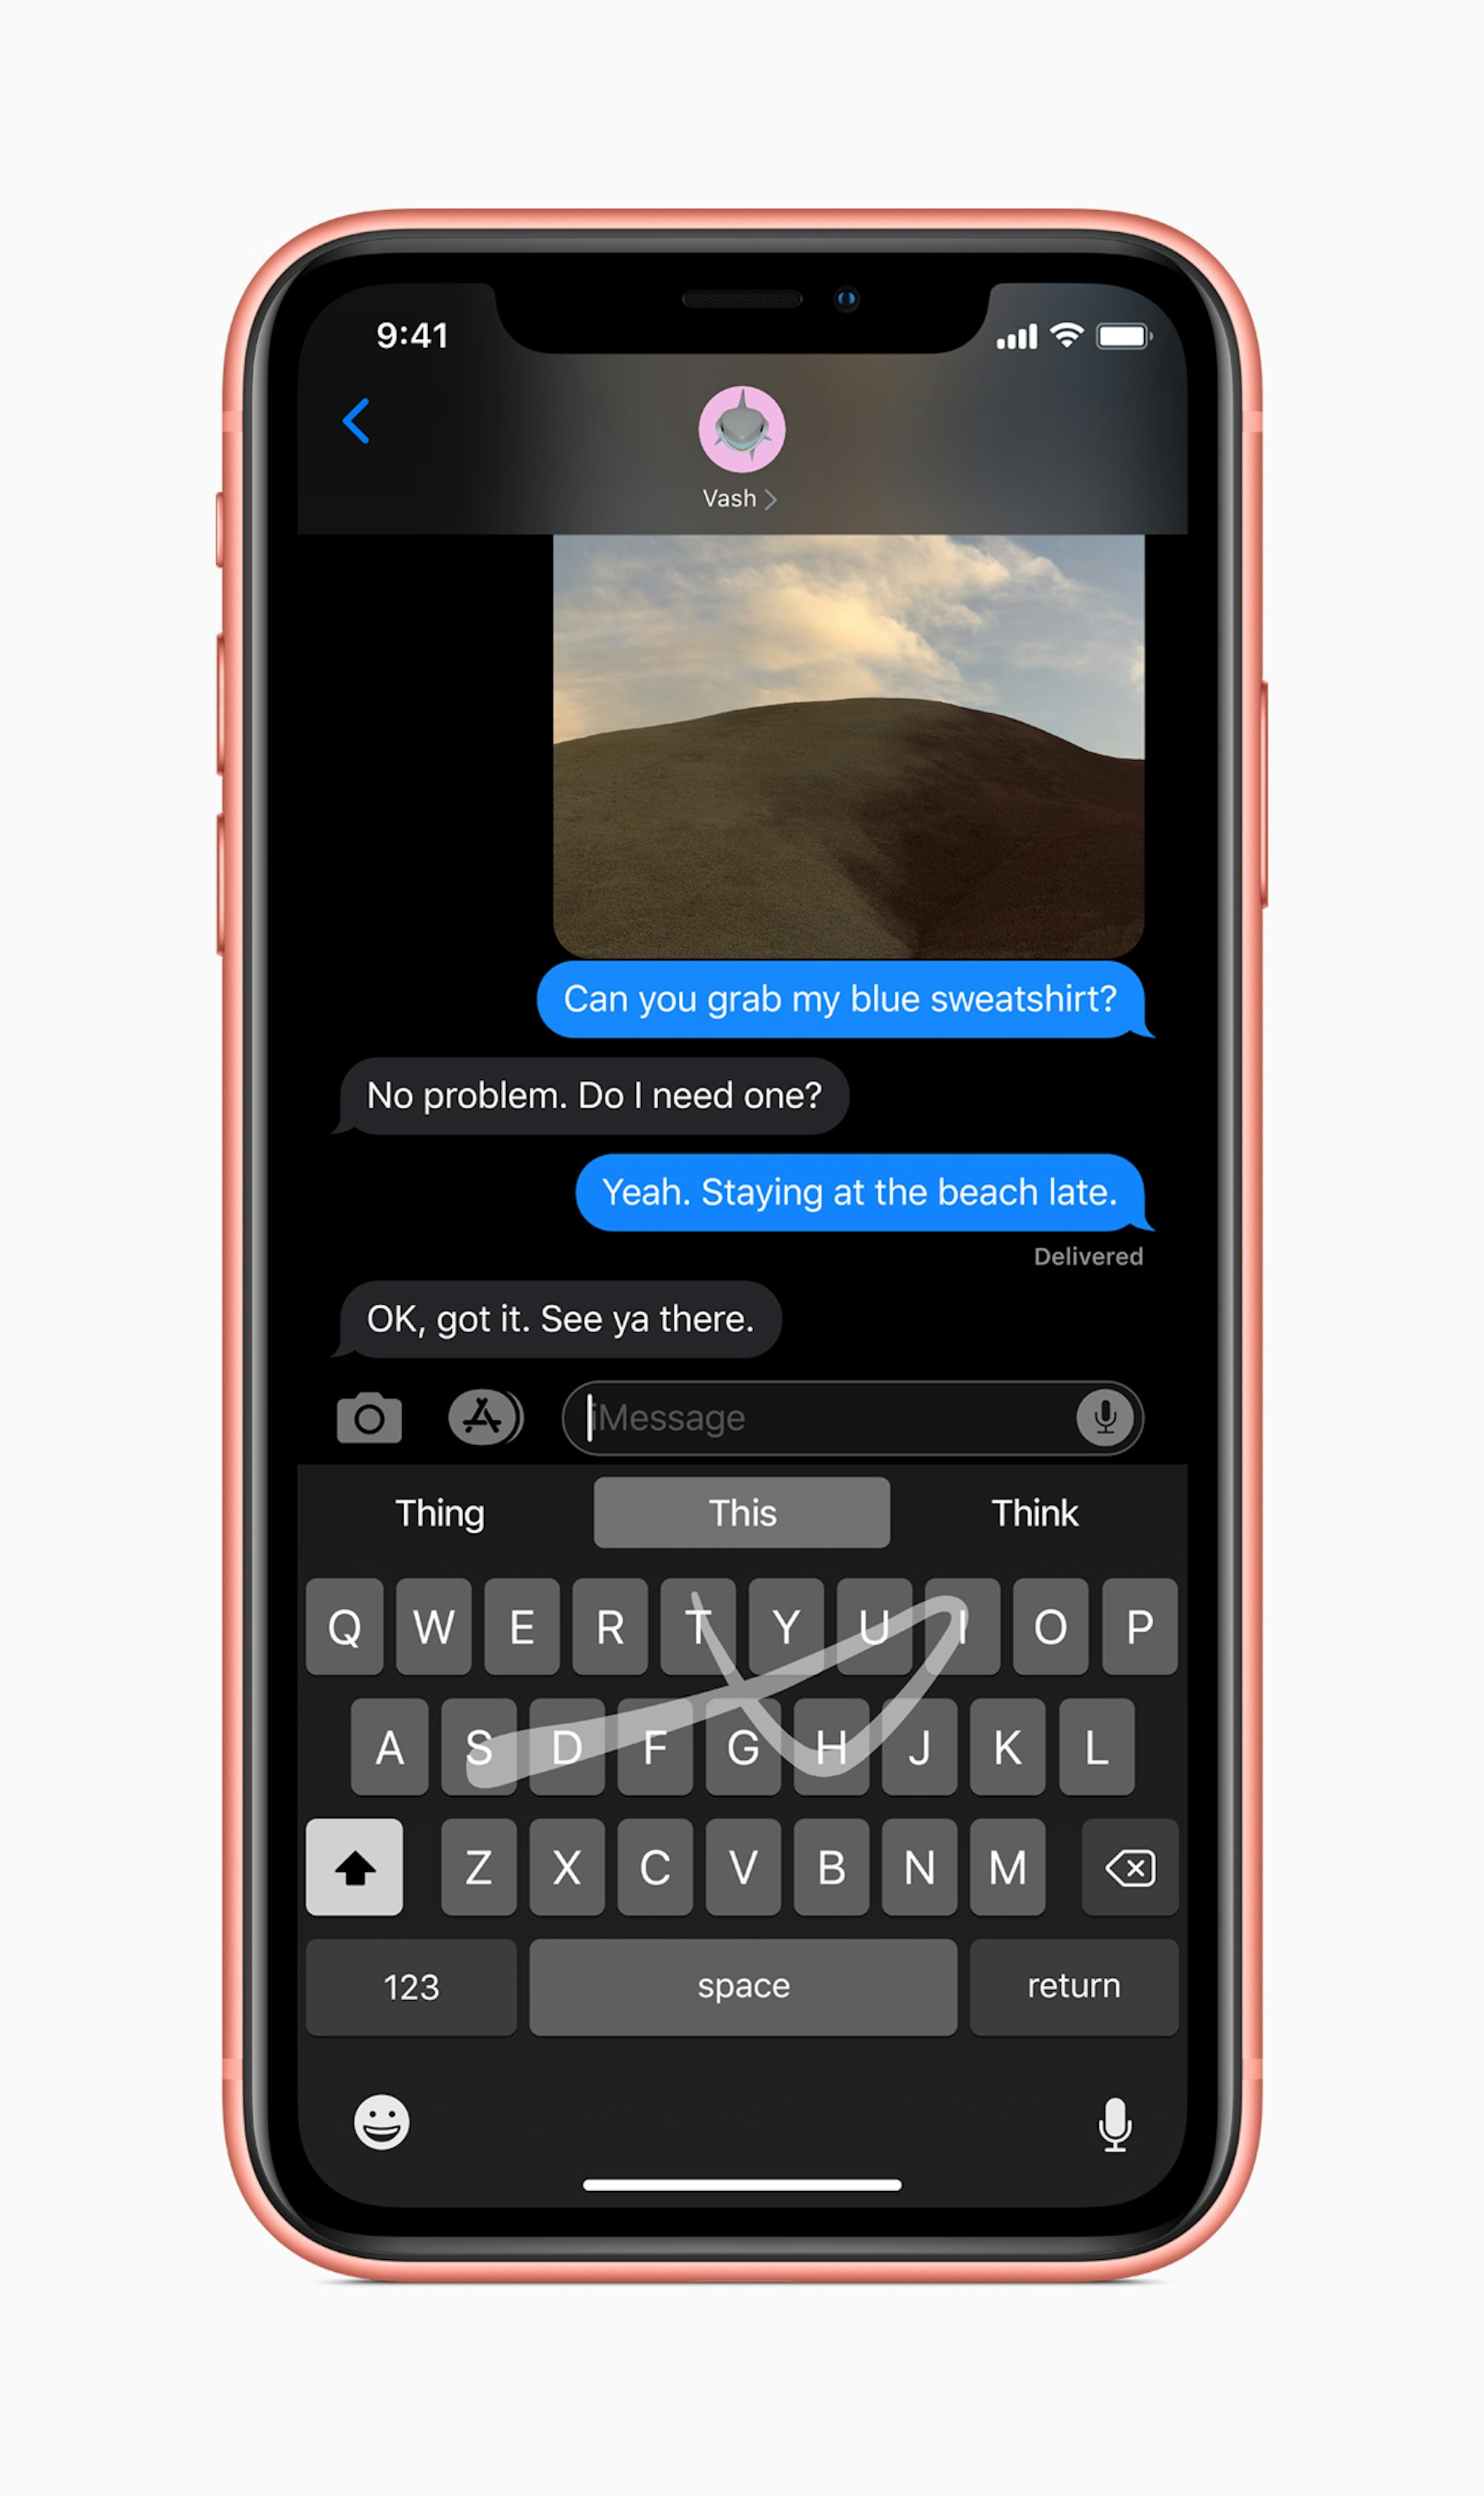 Apple-ios-13-quick-path-typing-screen-iphone-xs-06032019 (1)